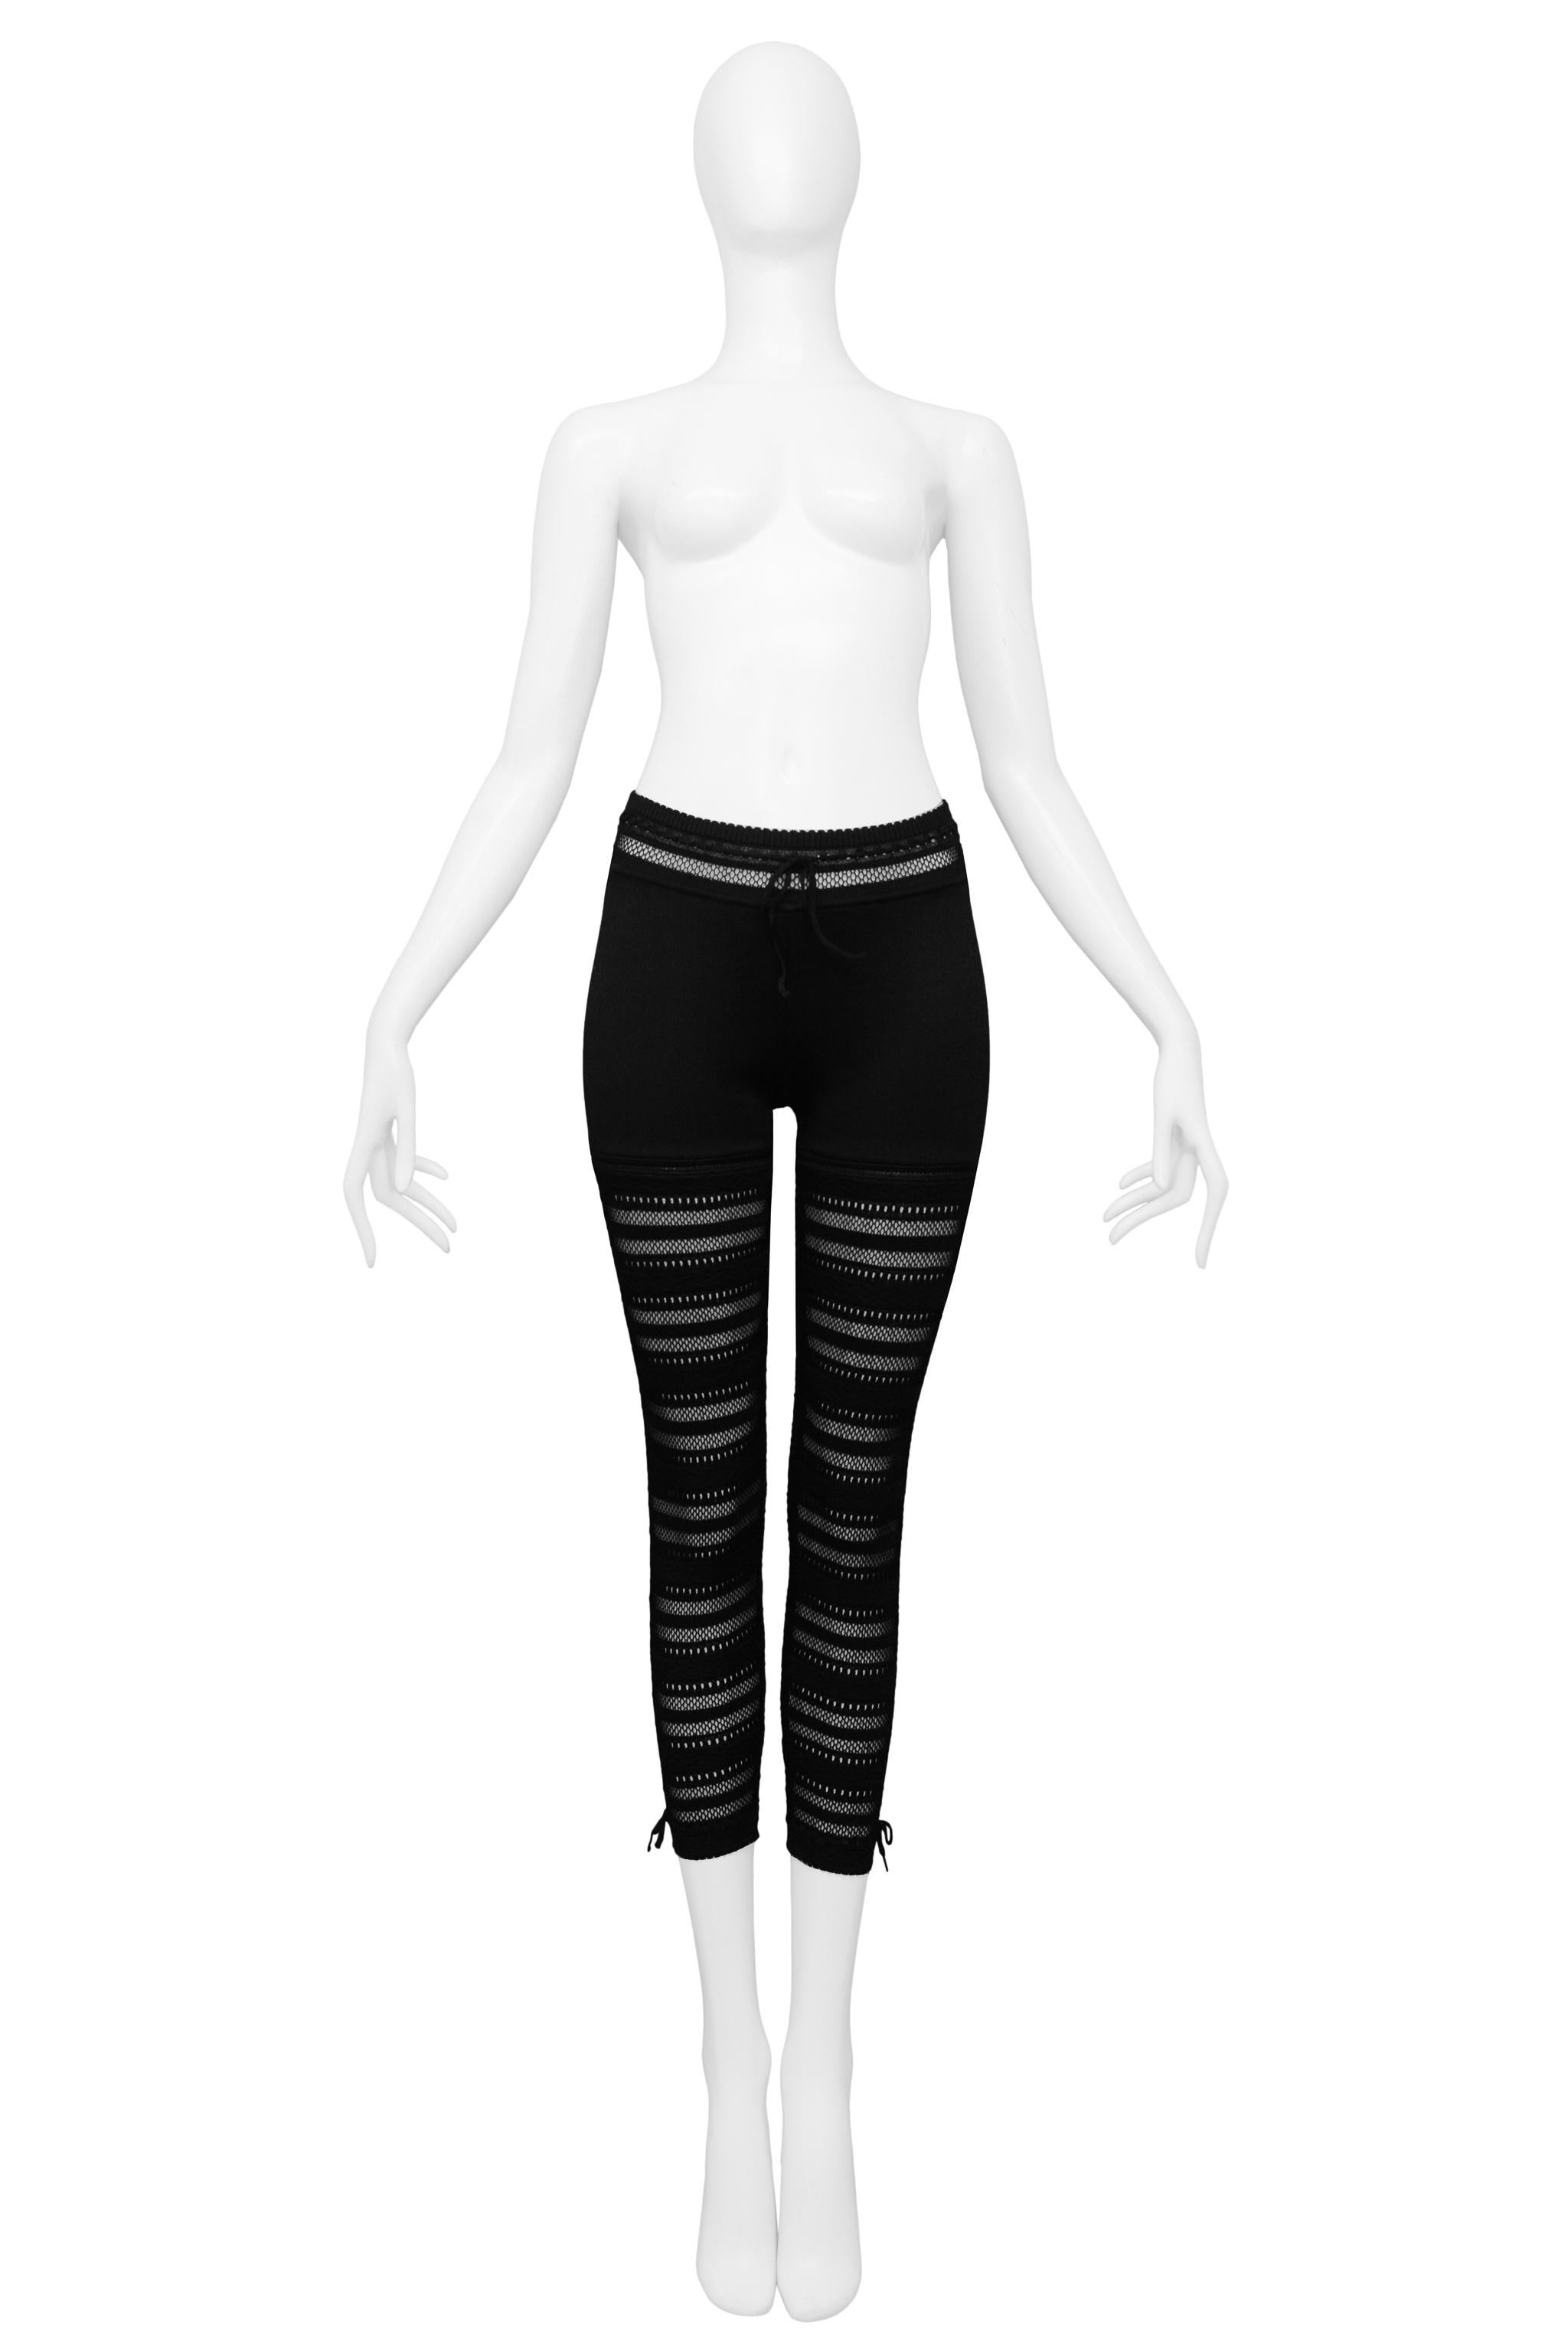 Resurrection Vintage is excited to offer a pair of vintage Azzedine Alaia black knit leggings featuring a drawstring waist, bike-short panel, crochet panels, and drawstrings at the ankles. 

Azzedine Alaia Paris
Size XS (Today's size 2-4)
Rayon